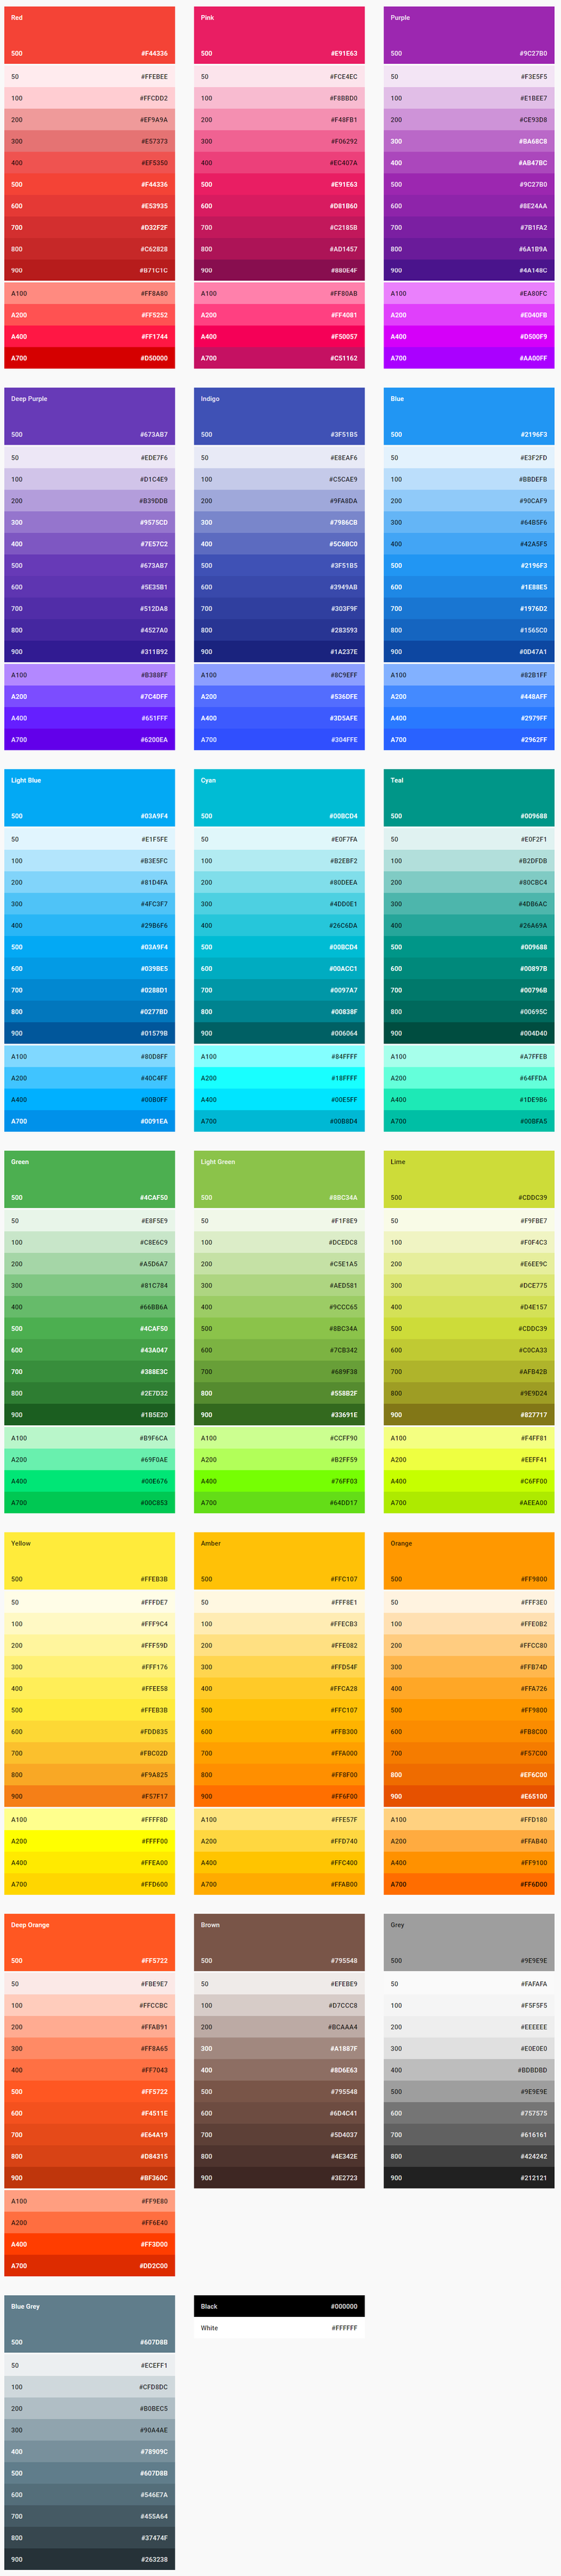 Color-Style-Google-design-guidelines-3.png